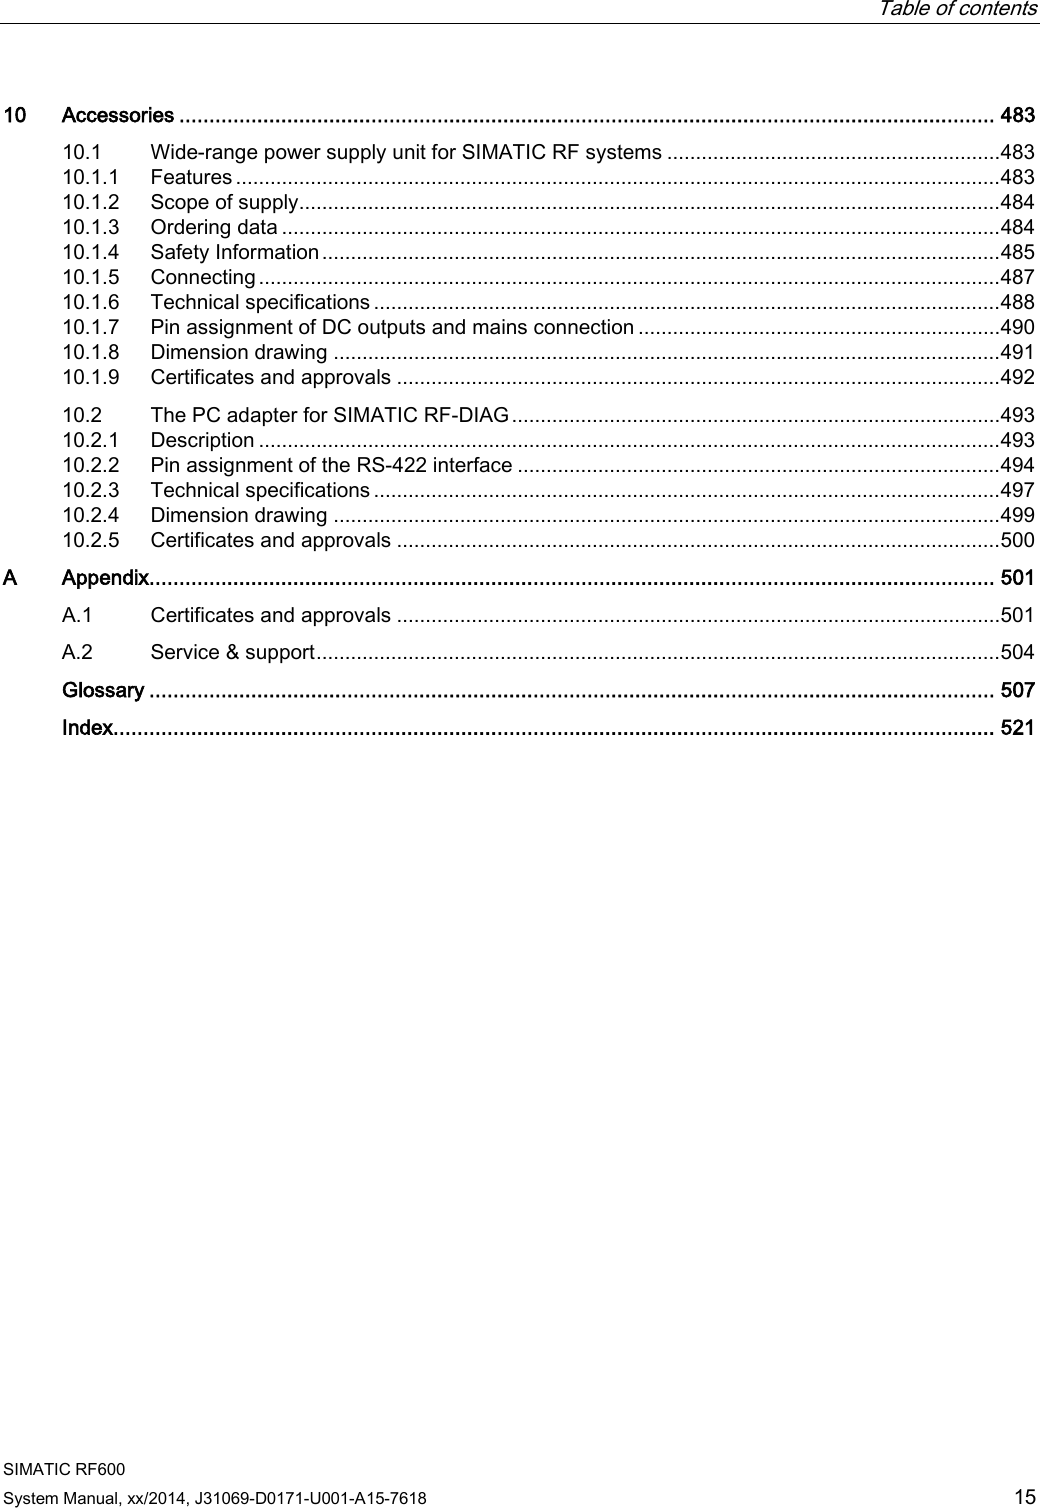  Table of contents   SIMATIC RF600 System Manual, xx/2014, J31069-D0171-U001-A15-7618 15 10 Accessories ........................................................................................................................................ 483 10.1 Wide-range power supply unit for SIMATIC RF systems .......................................................... 483 10.1.1 Features ..................................................................................................................................... 483 10.1.2 Scope of supply.......................................................................................................................... 484 10.1.3 Ordering data ............................................................................................................................. 484 10.1.4 Safety Information ...................................................................................................................... 485 10.1.5 Connecting ................................................................................................................................. 487 10.1.6 Technical specifications ............................................................................................................. 488 10.1.7 Pin assignment of DC outputs and mains connection ............................................................... 490 10.1.8 Dimension drawing .................................................................................................................... 491 10.1.9 Certificates and approvals ......................................................................................................... 492 10.2 The PC adapter for SIMATIC RF-DIAG ..................................................................................... 493 10.2.1 Description ................................................................................................................................. 493 10.2.2 Pin assignment of the RS-422 interface .................................................................................... 494 10.2.3 Technical specifications ............................................................................................................. 497 10.2.4 Dimension drawing .................................................................................................................... 499 10.2.5 Certificates and approvals ......................................................................................................... 500 A  Appendix............................................................................................................................................. 501 A.1 Certificates and approvals ......................................................................................................... 501 A.2 Service &amp; support ....................................................................................................................... 504  Glossary ............................................................................................................................................. 507  Index................................................................................................................................................... 521 